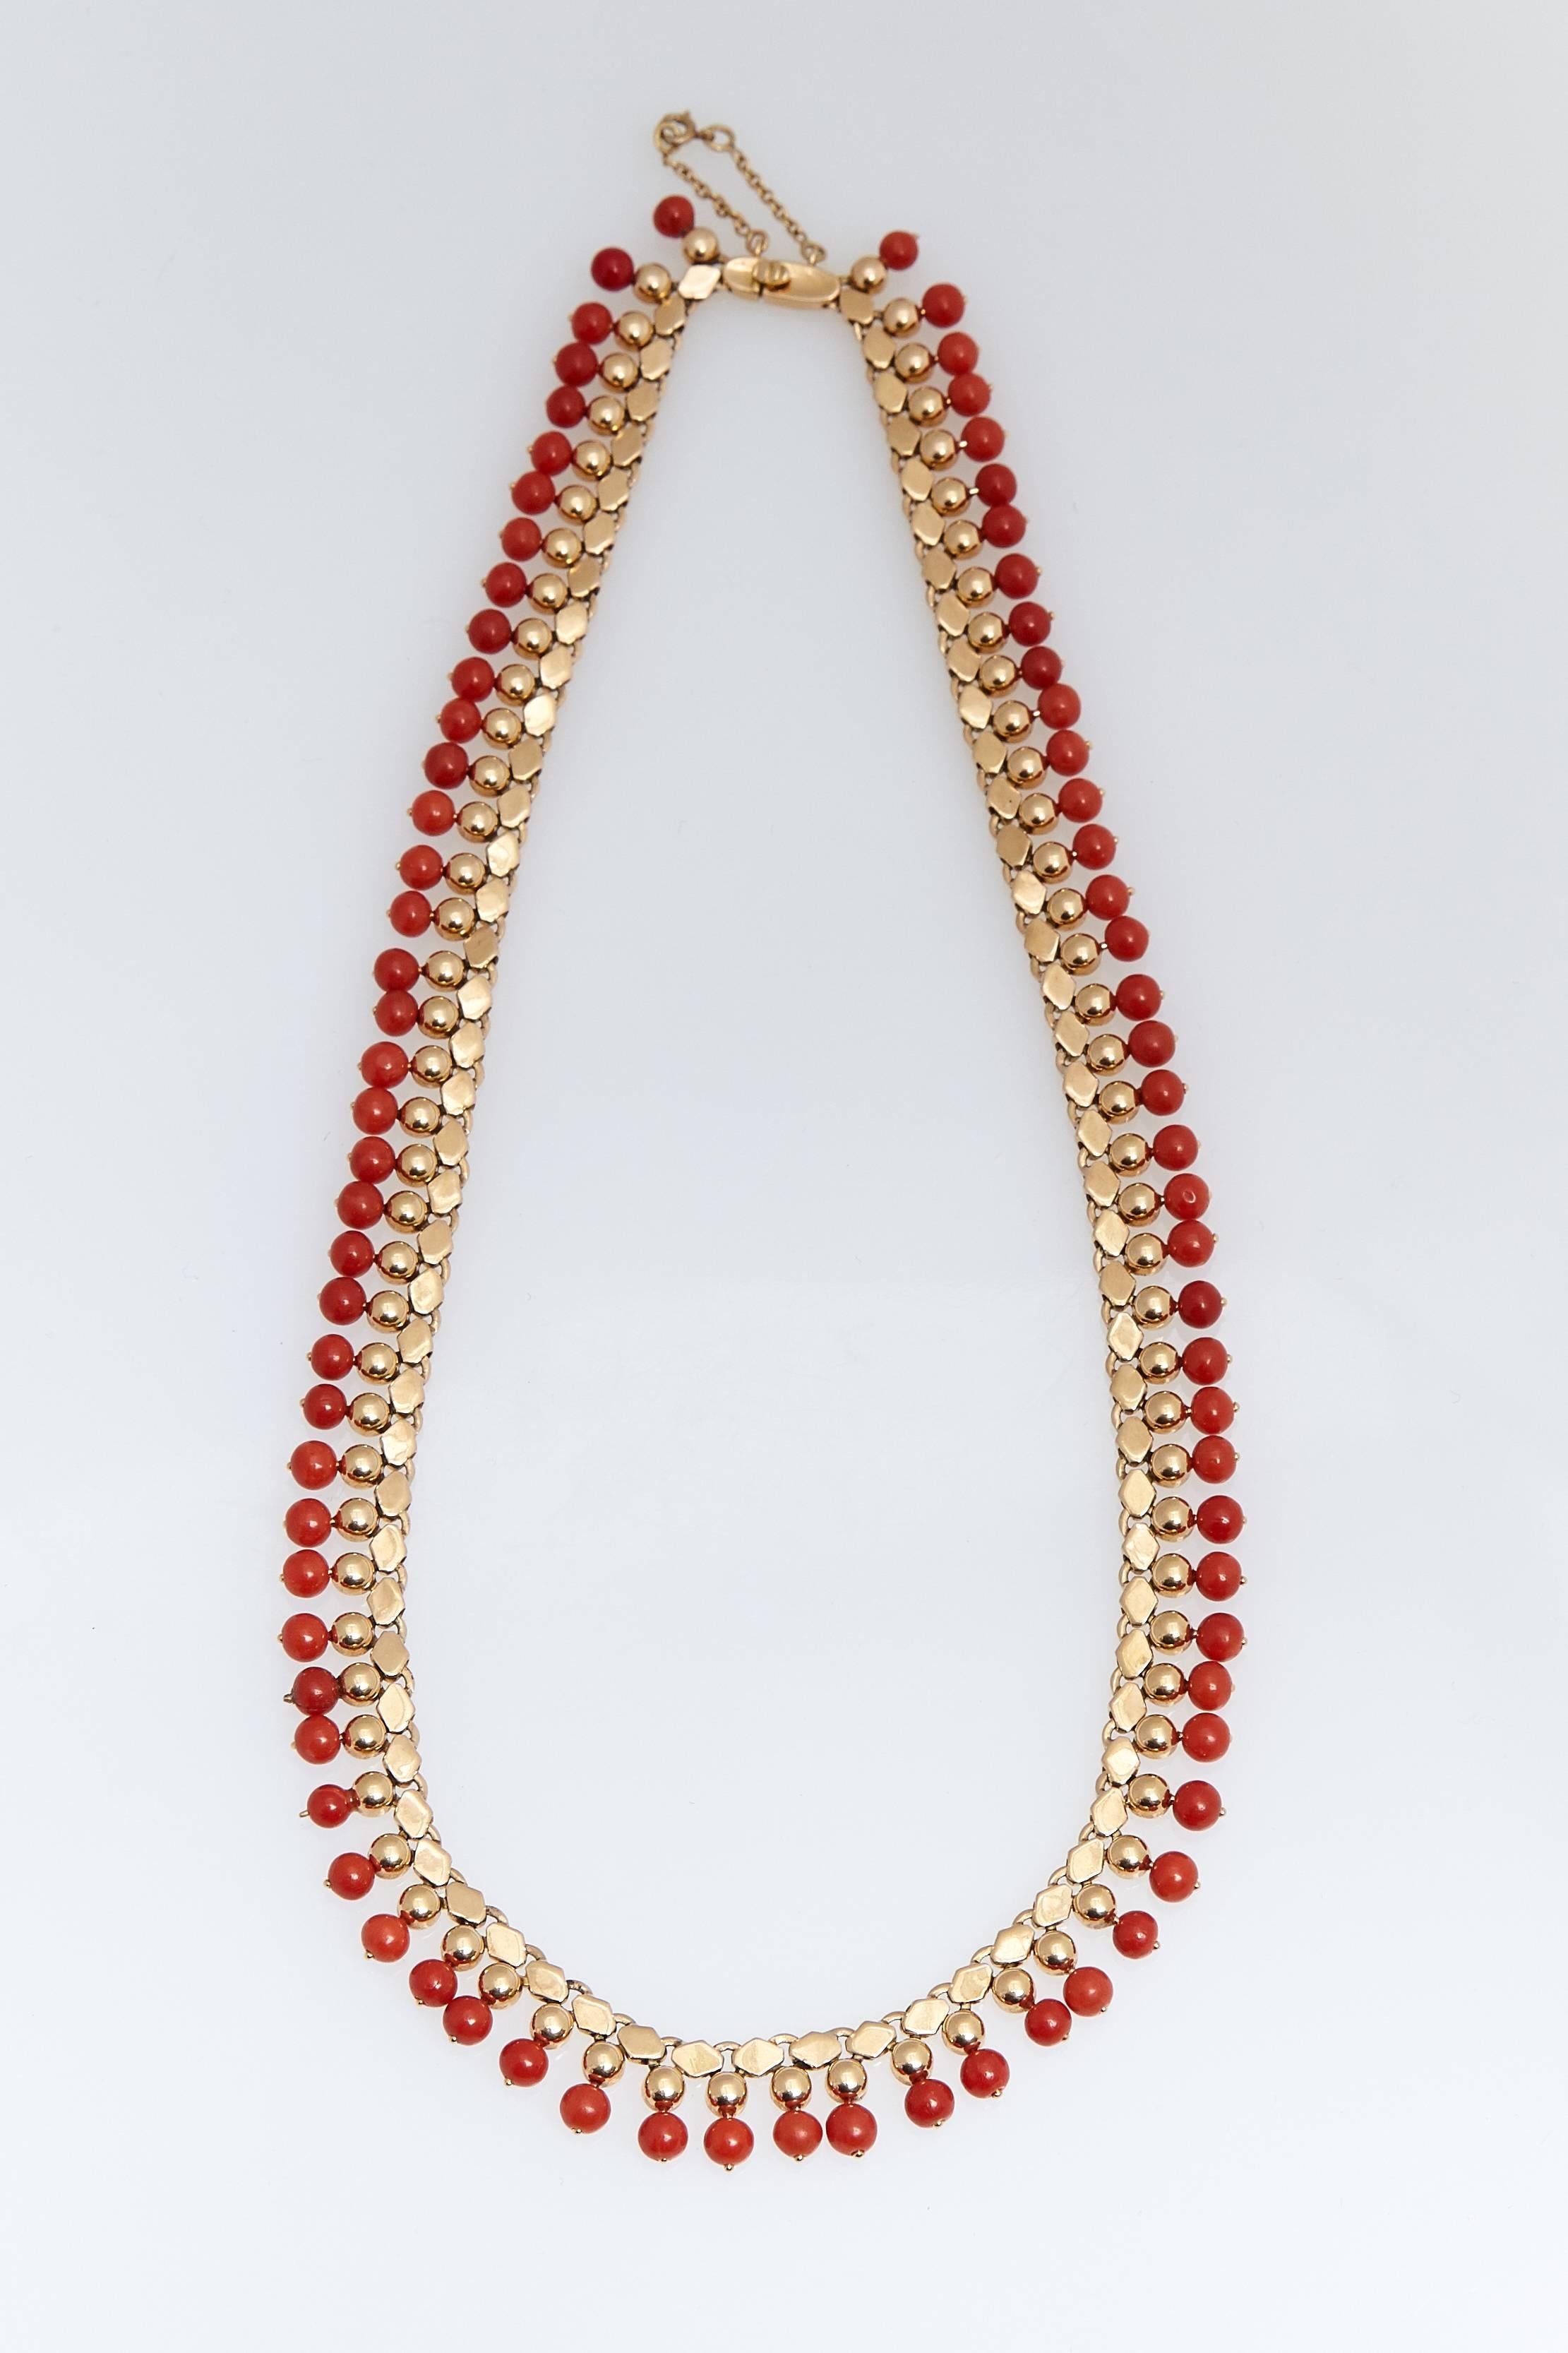 Beautiful 18 karat yellow gold and coral beads necklace. The  coral beads are attached to gold beads which are attached to gold links.  The necklace measures approximately 17 3/4 inches long.